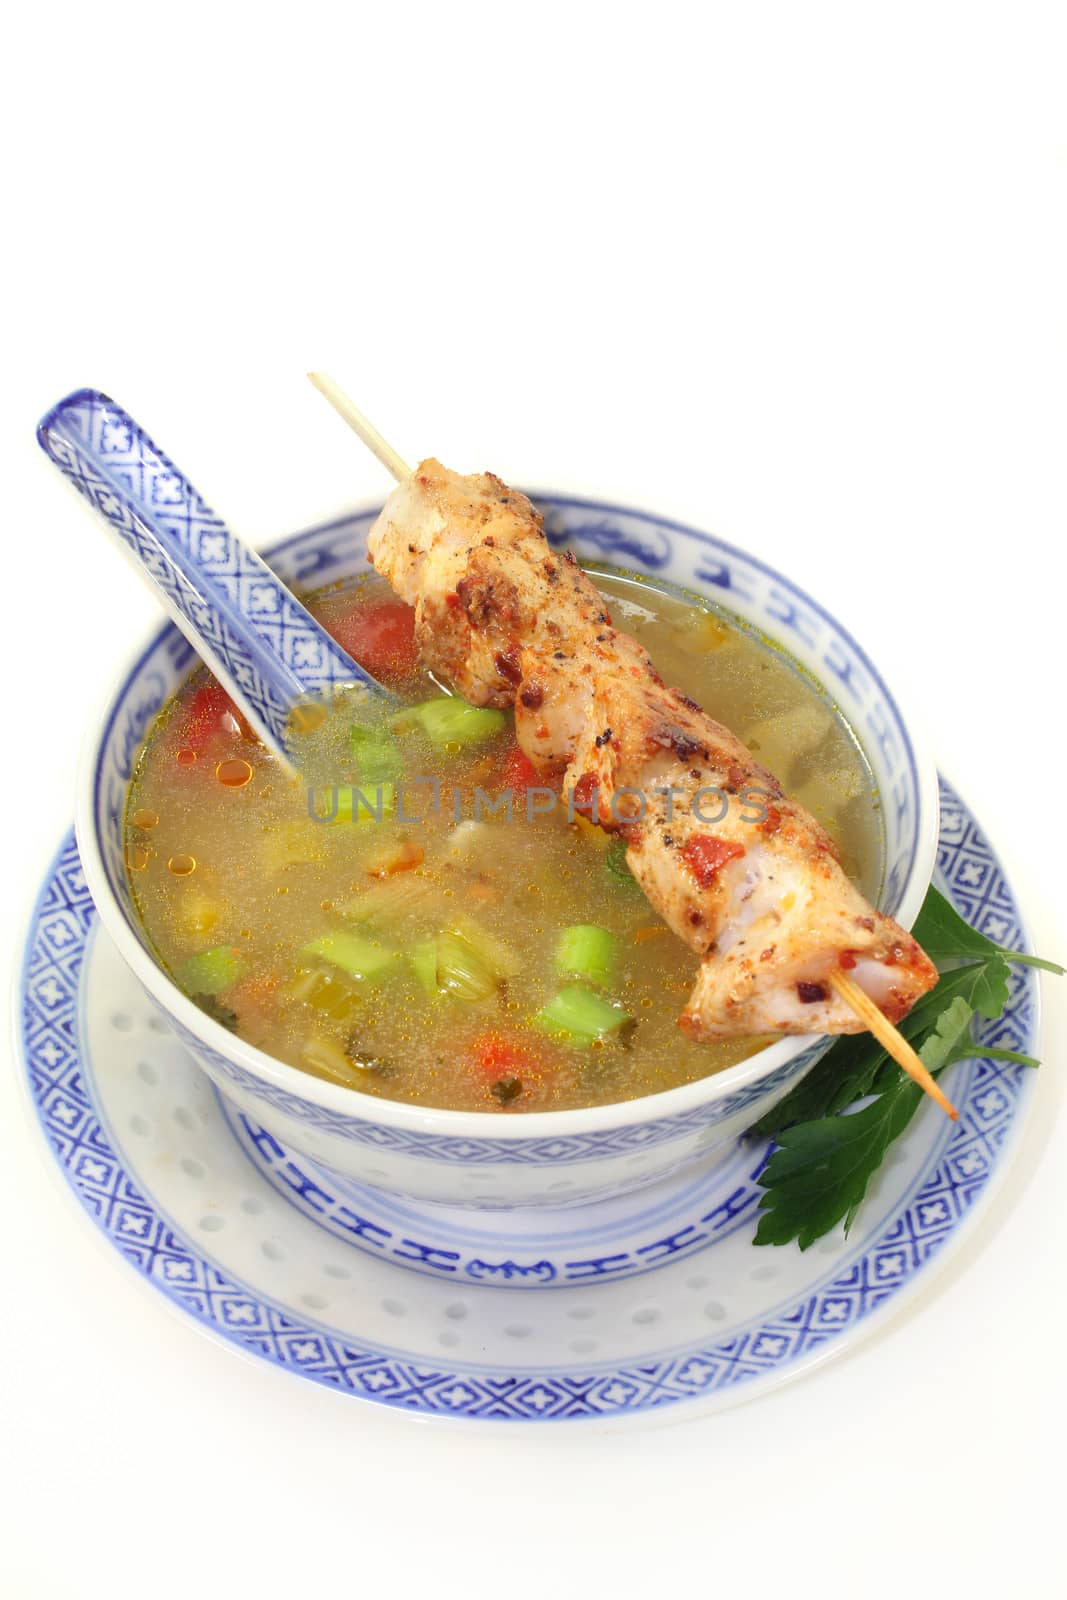 a bowl of chicken consomme and a chicken skewer